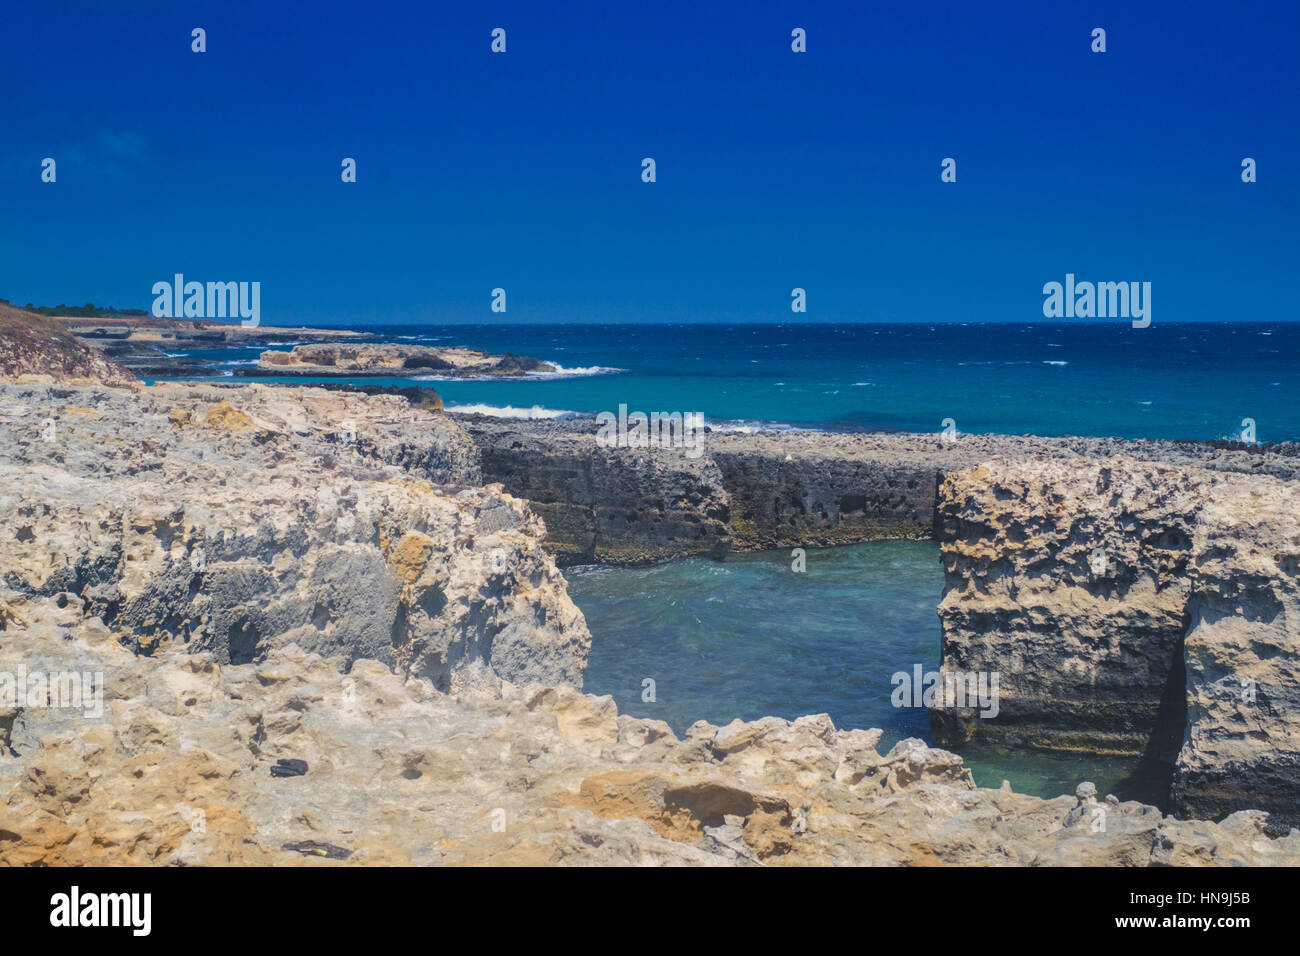 Adriatic rocky shoreline with an old stone quarry in Salento, Italy. Stock Photo